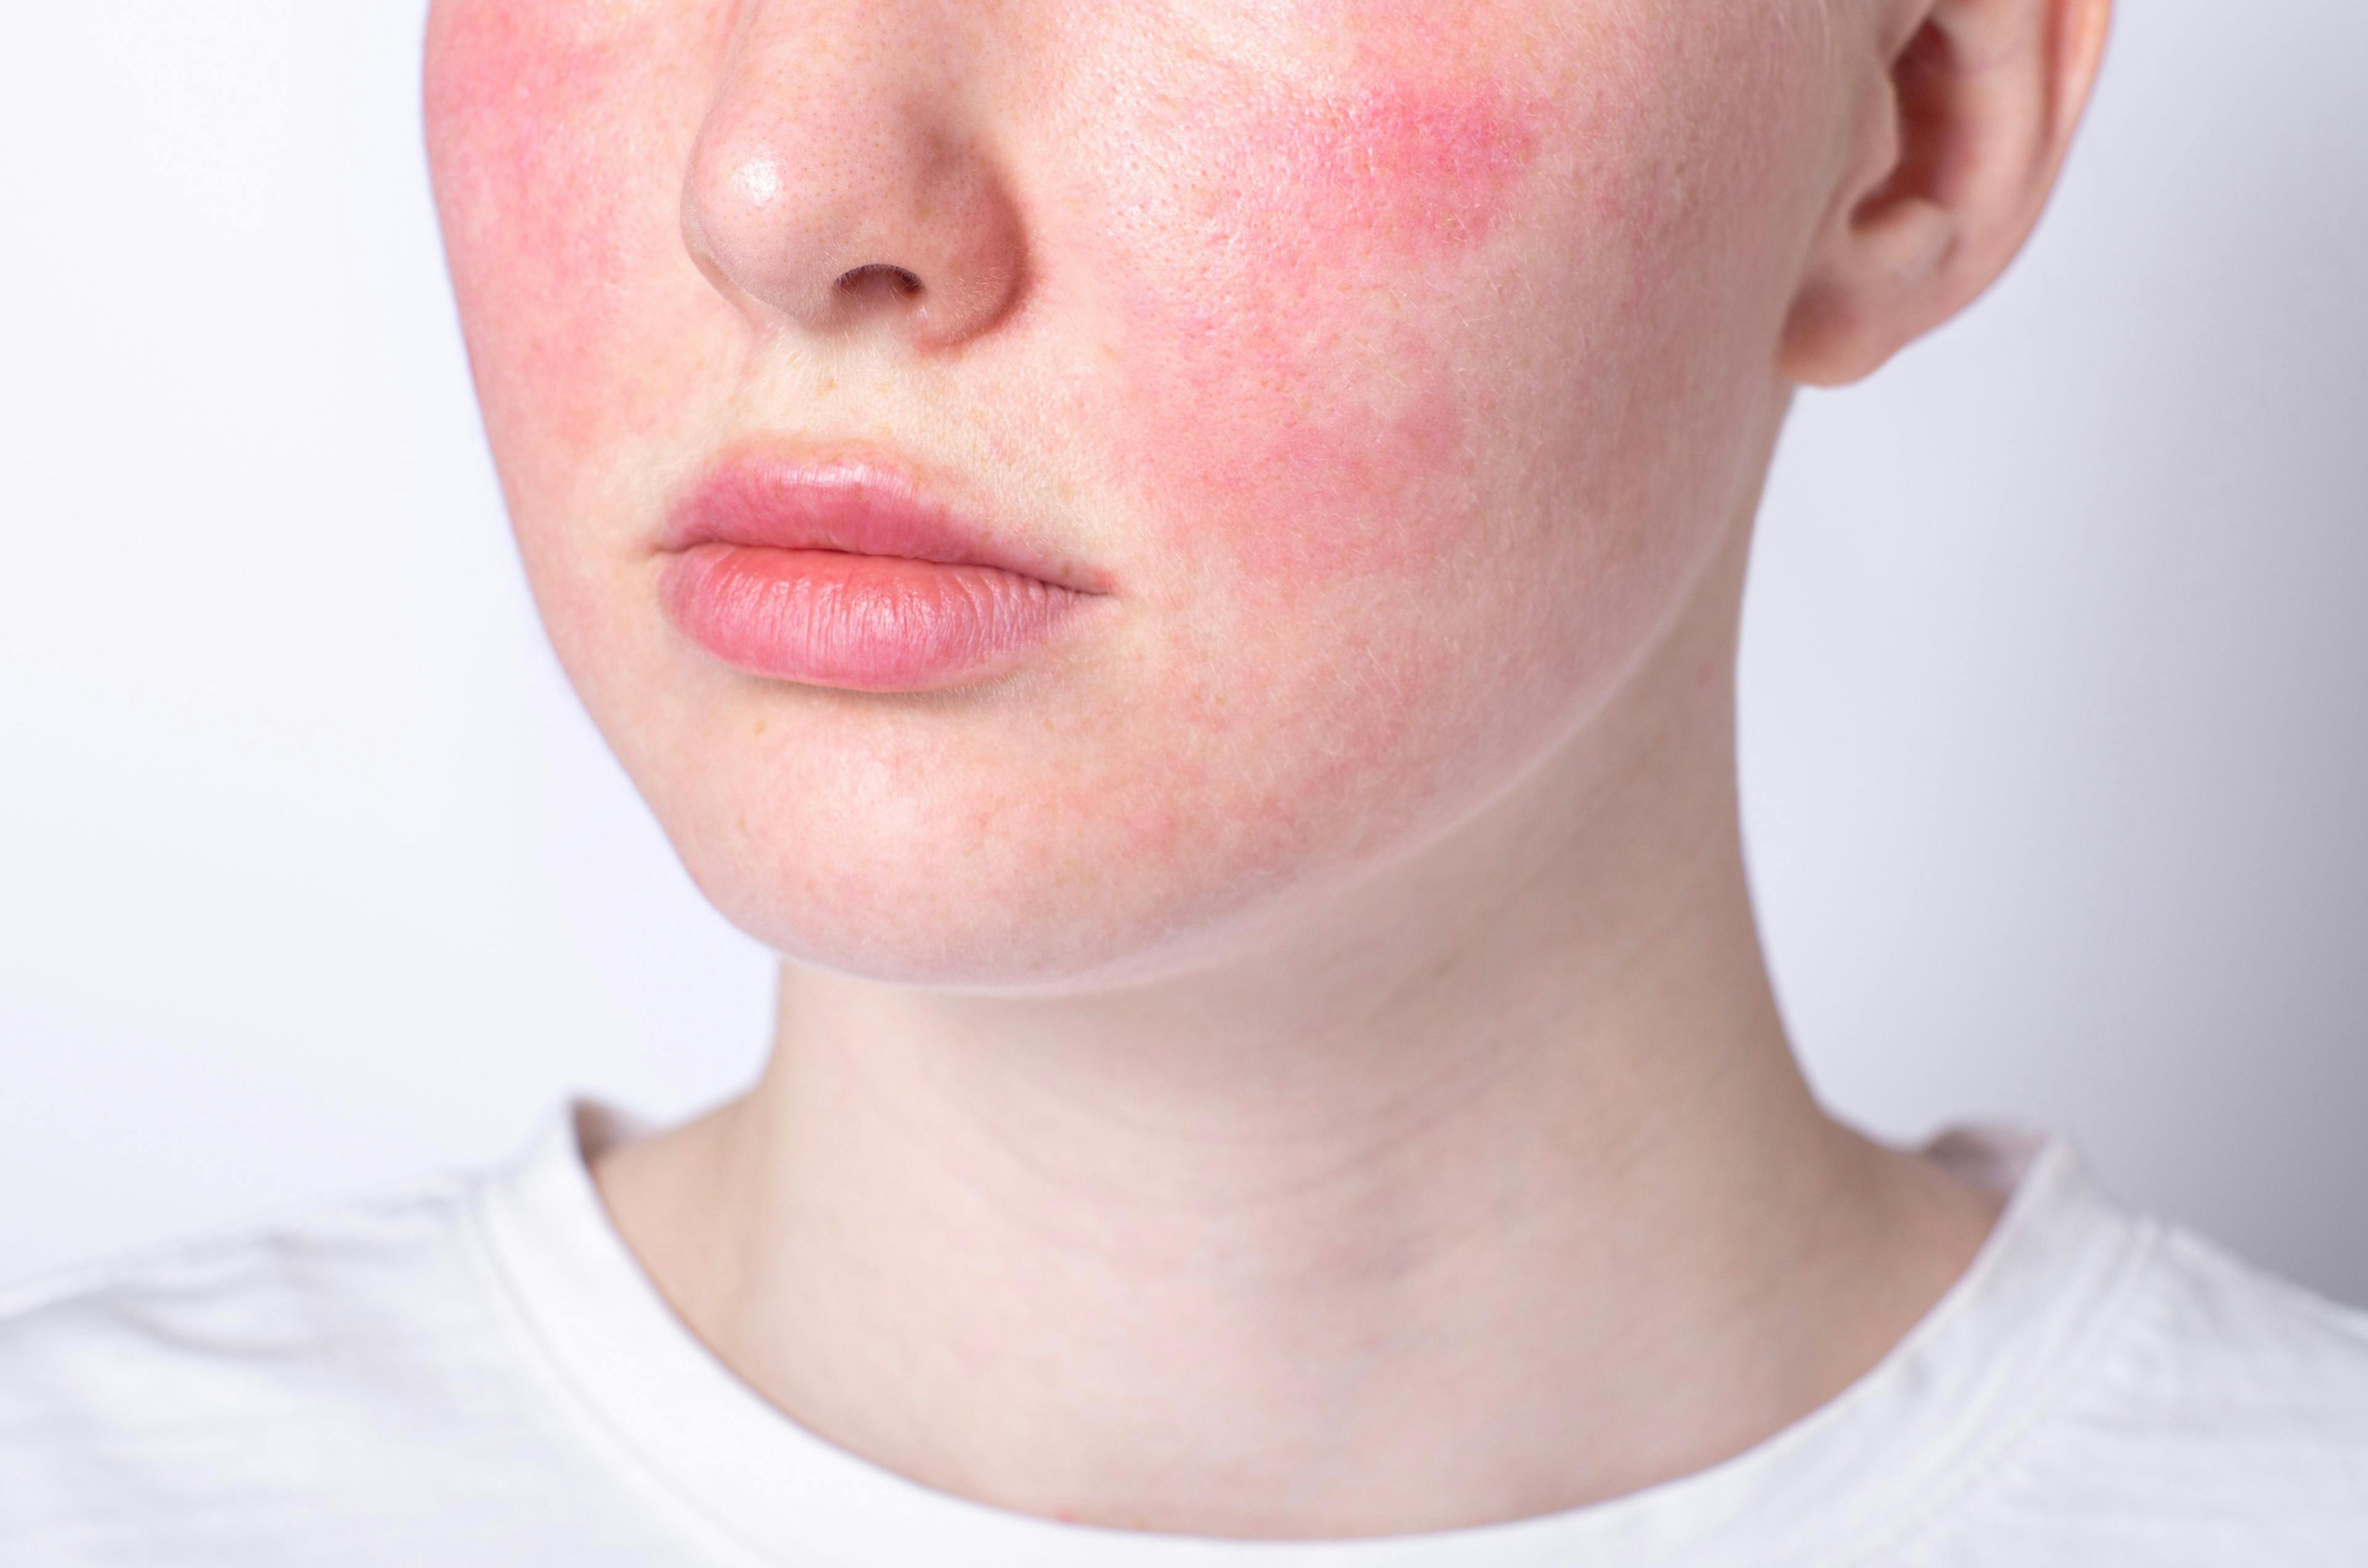 Review Finds Topical Erythromycin, Azithromycin, and Metronidazole Most Common Treatments for Pediatric Rosacea